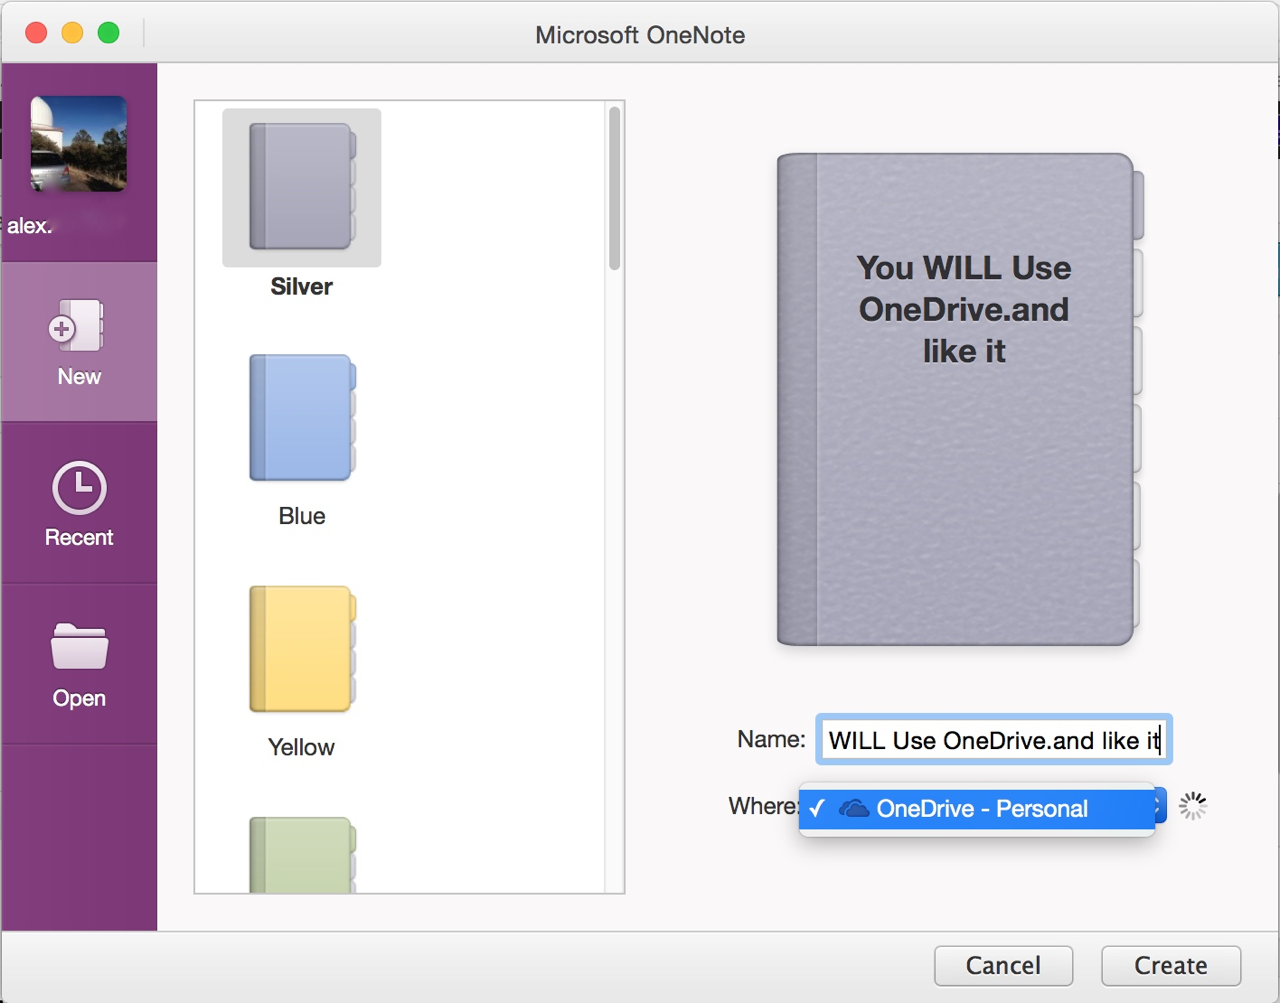 does the purchased version of onenote in office for mac allow saving to local disk